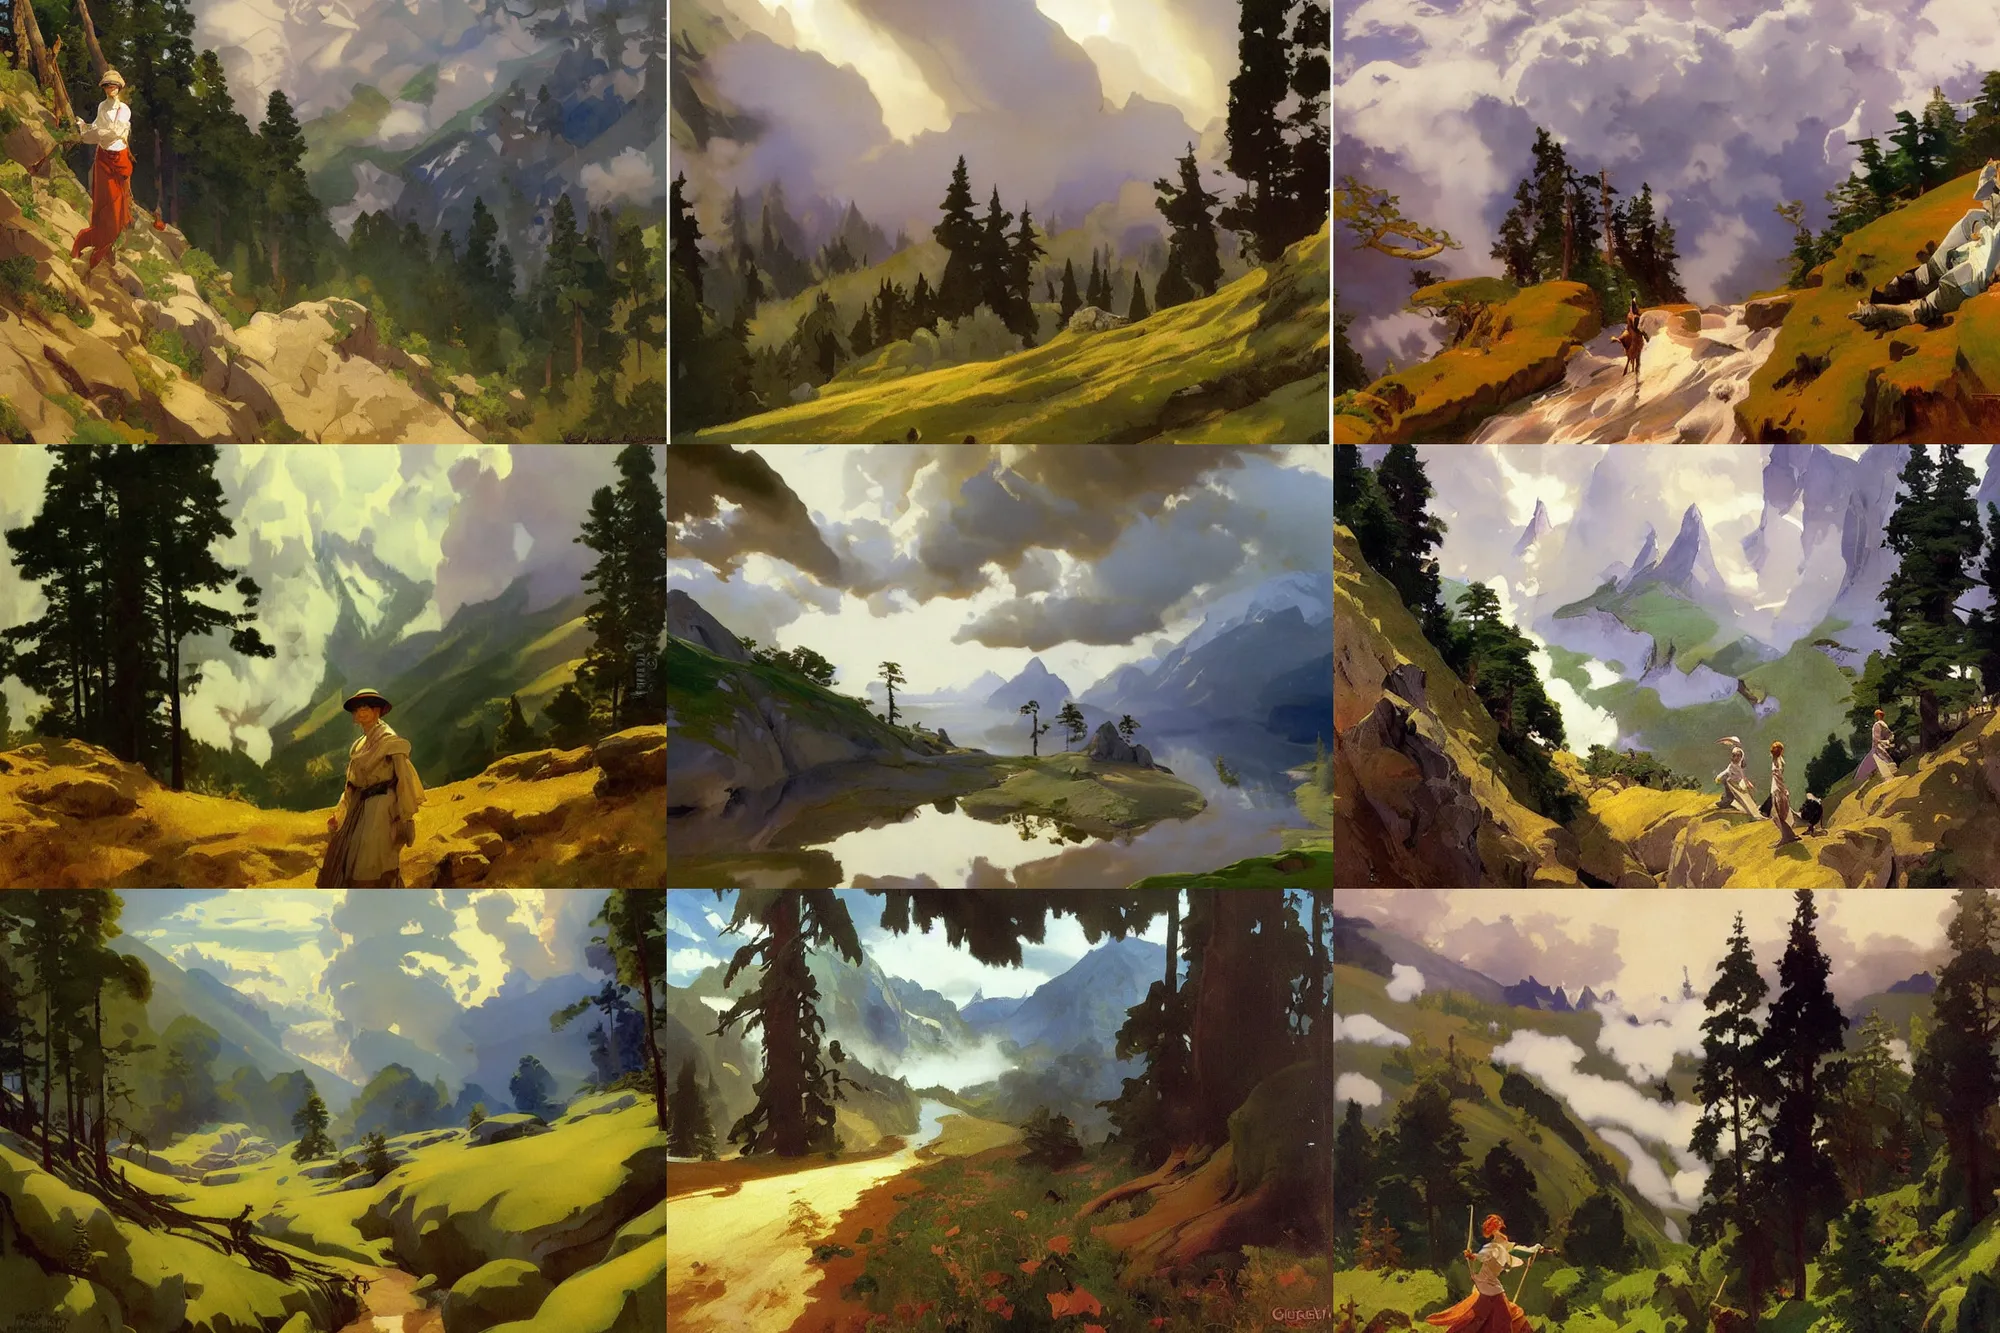 Prompt: painting by sargent and leyendecker and greg hildebrandt savrasov levitan polenov, studio ghibly style mononoke, middle earth above the layered low clouds road between forests trees river lakes stones top of the mountain overcast storm masterpiece